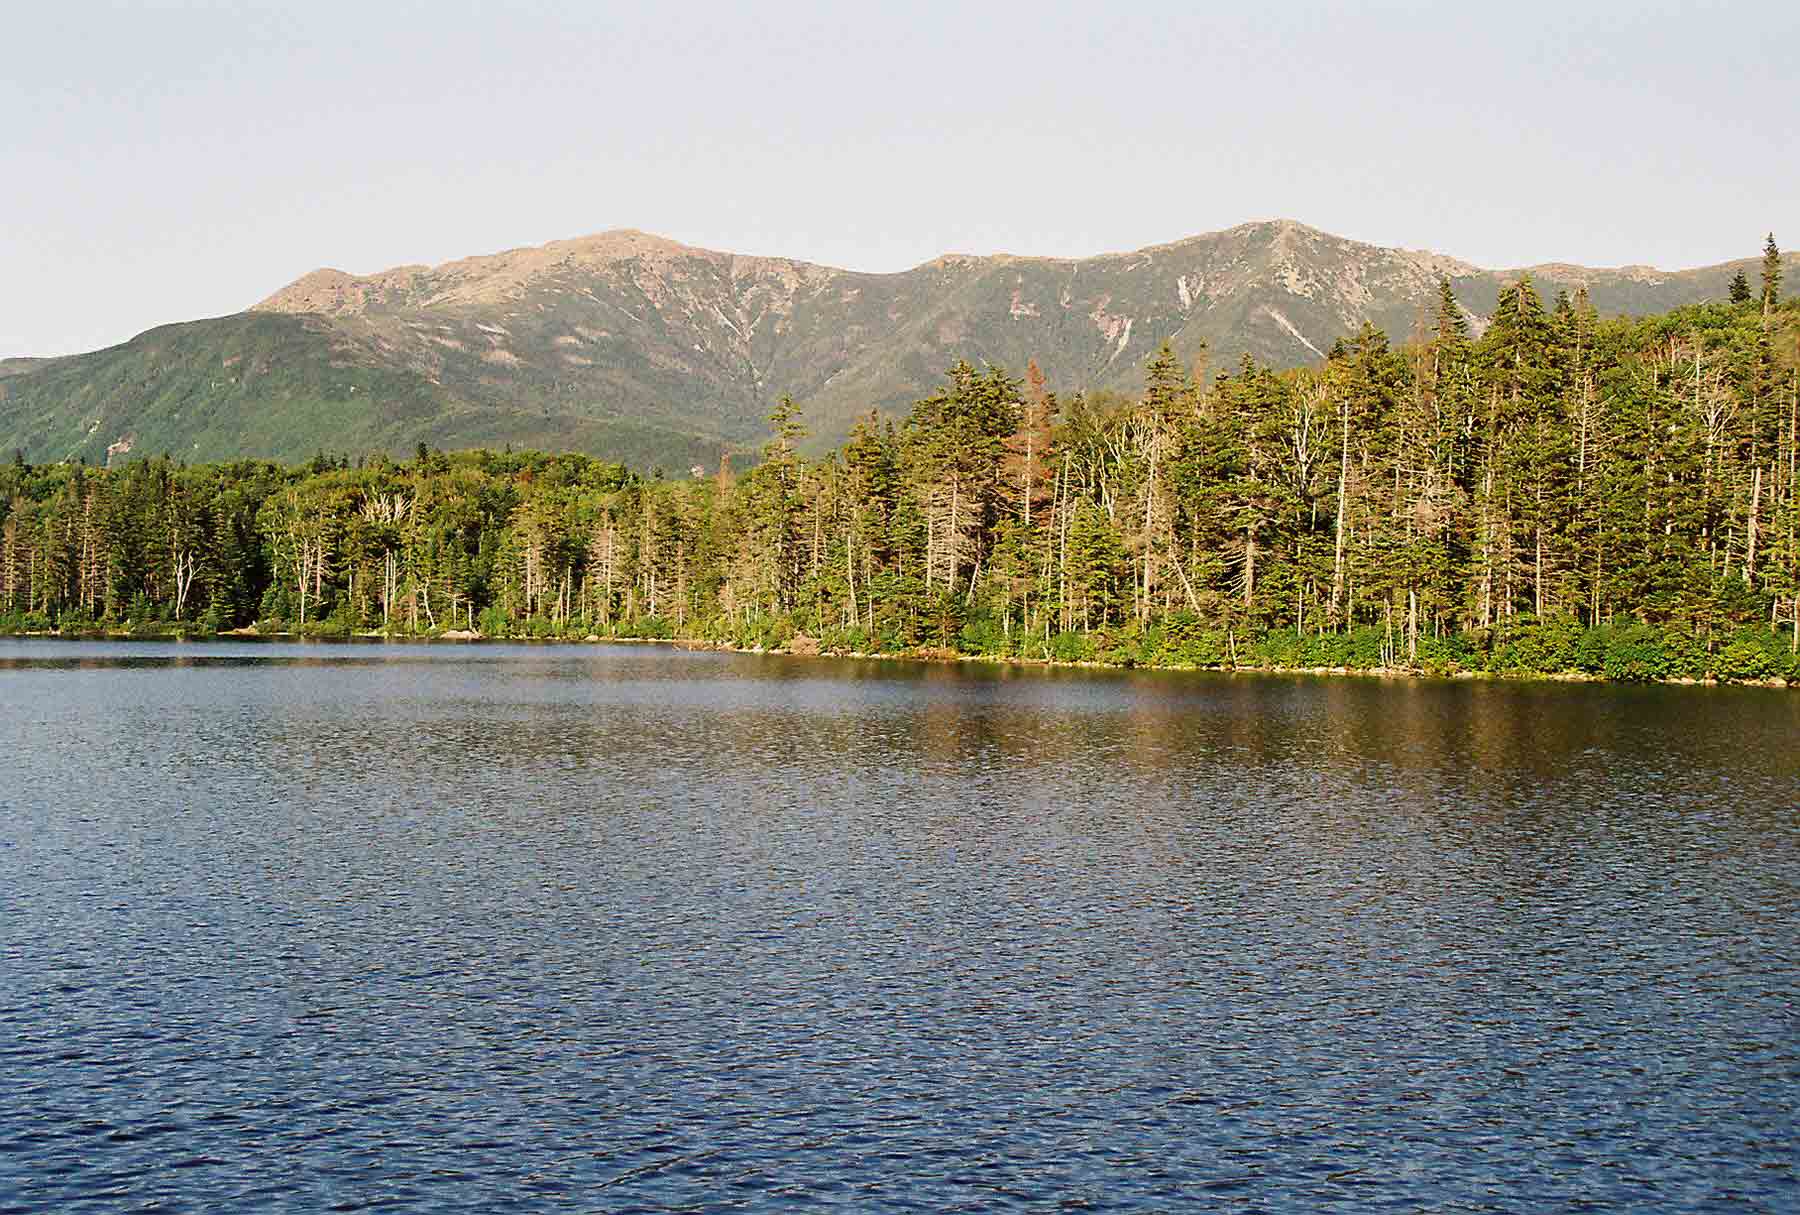 mm 2.9 - View across Lonesome Lake to the Franconia Range from near Lonesome Lake Hut. Largest peak is Mt. Lafayette.  Courtesy dlcul@conncoll.edu